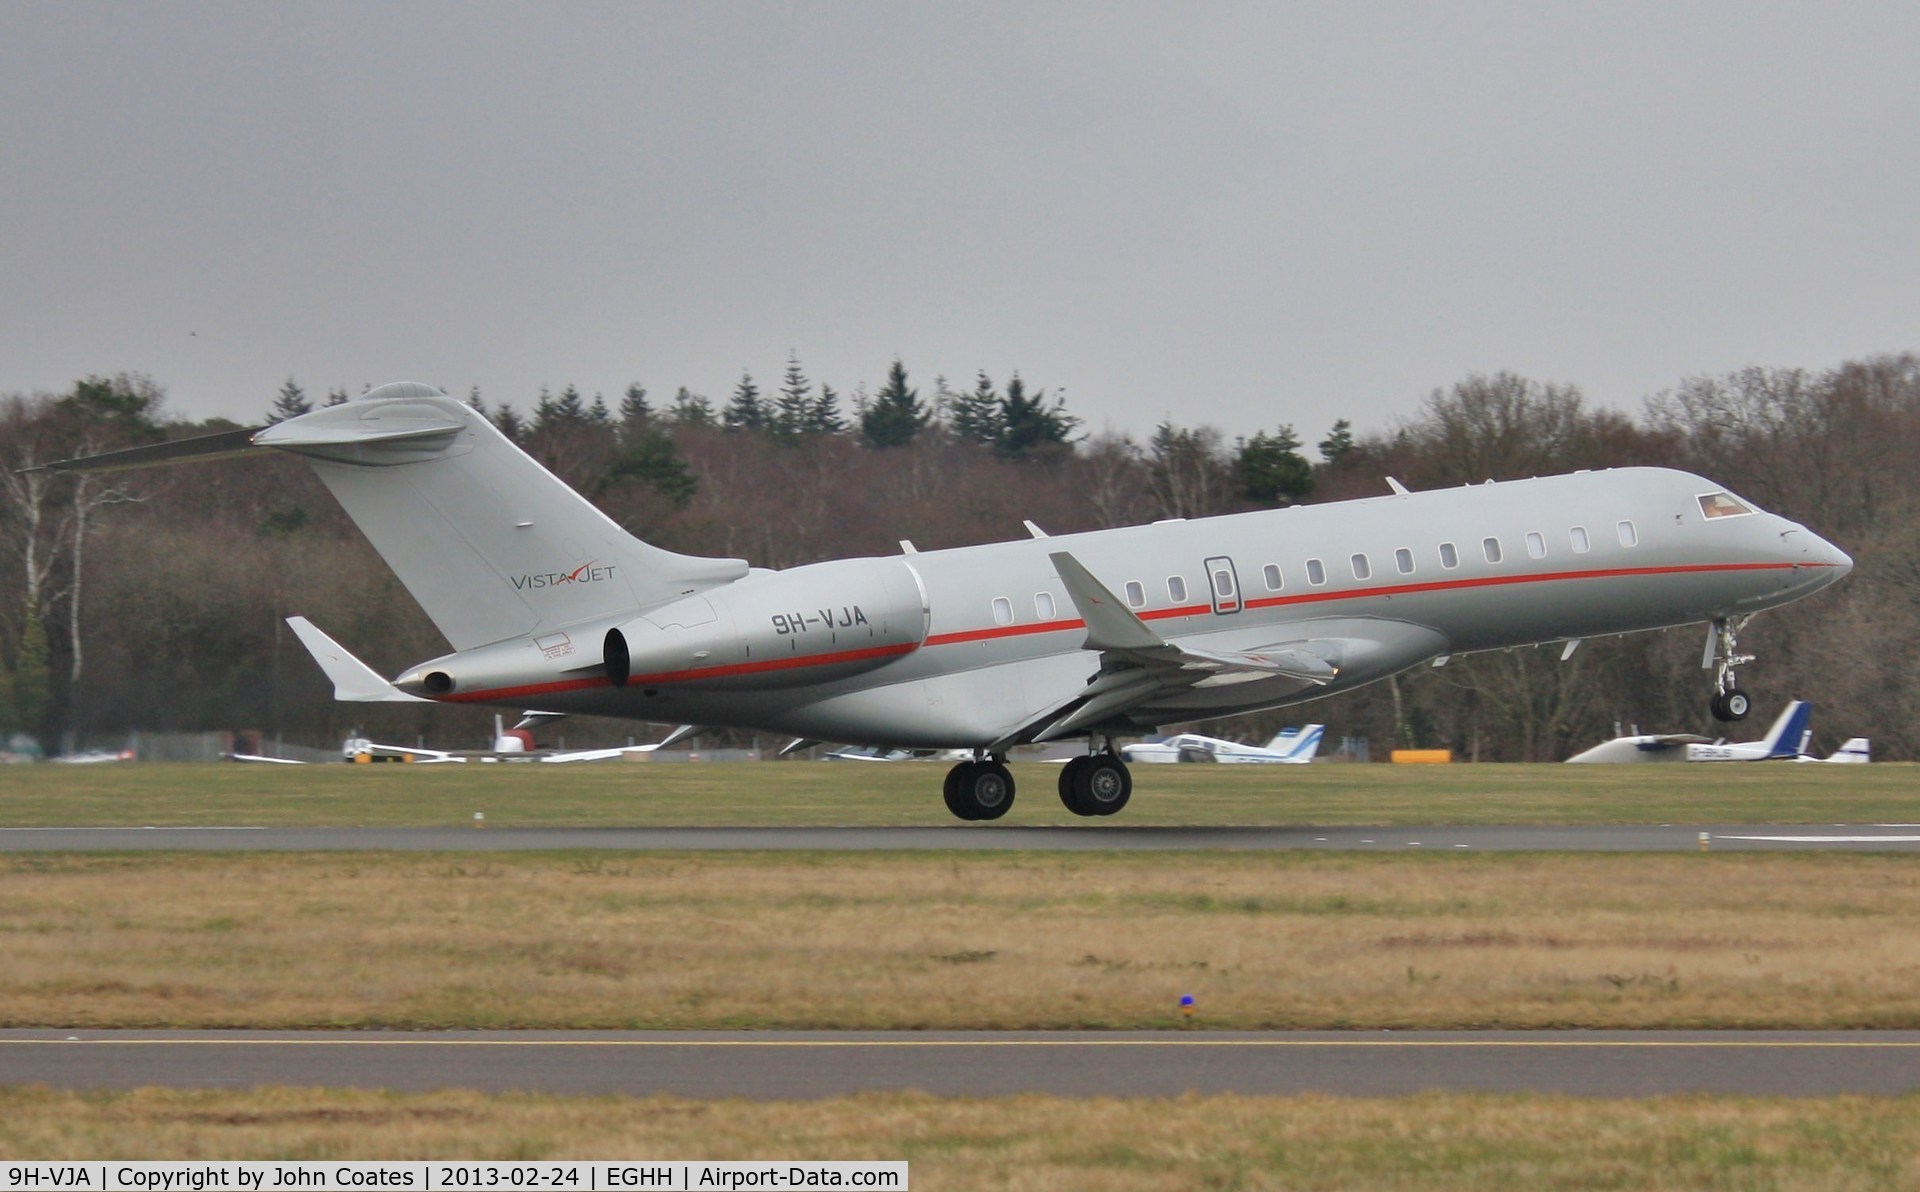 9H-VJA, 2011 Bombardier BD-700-1A10 Global Express XRS C/N 9441, Touch and Go training